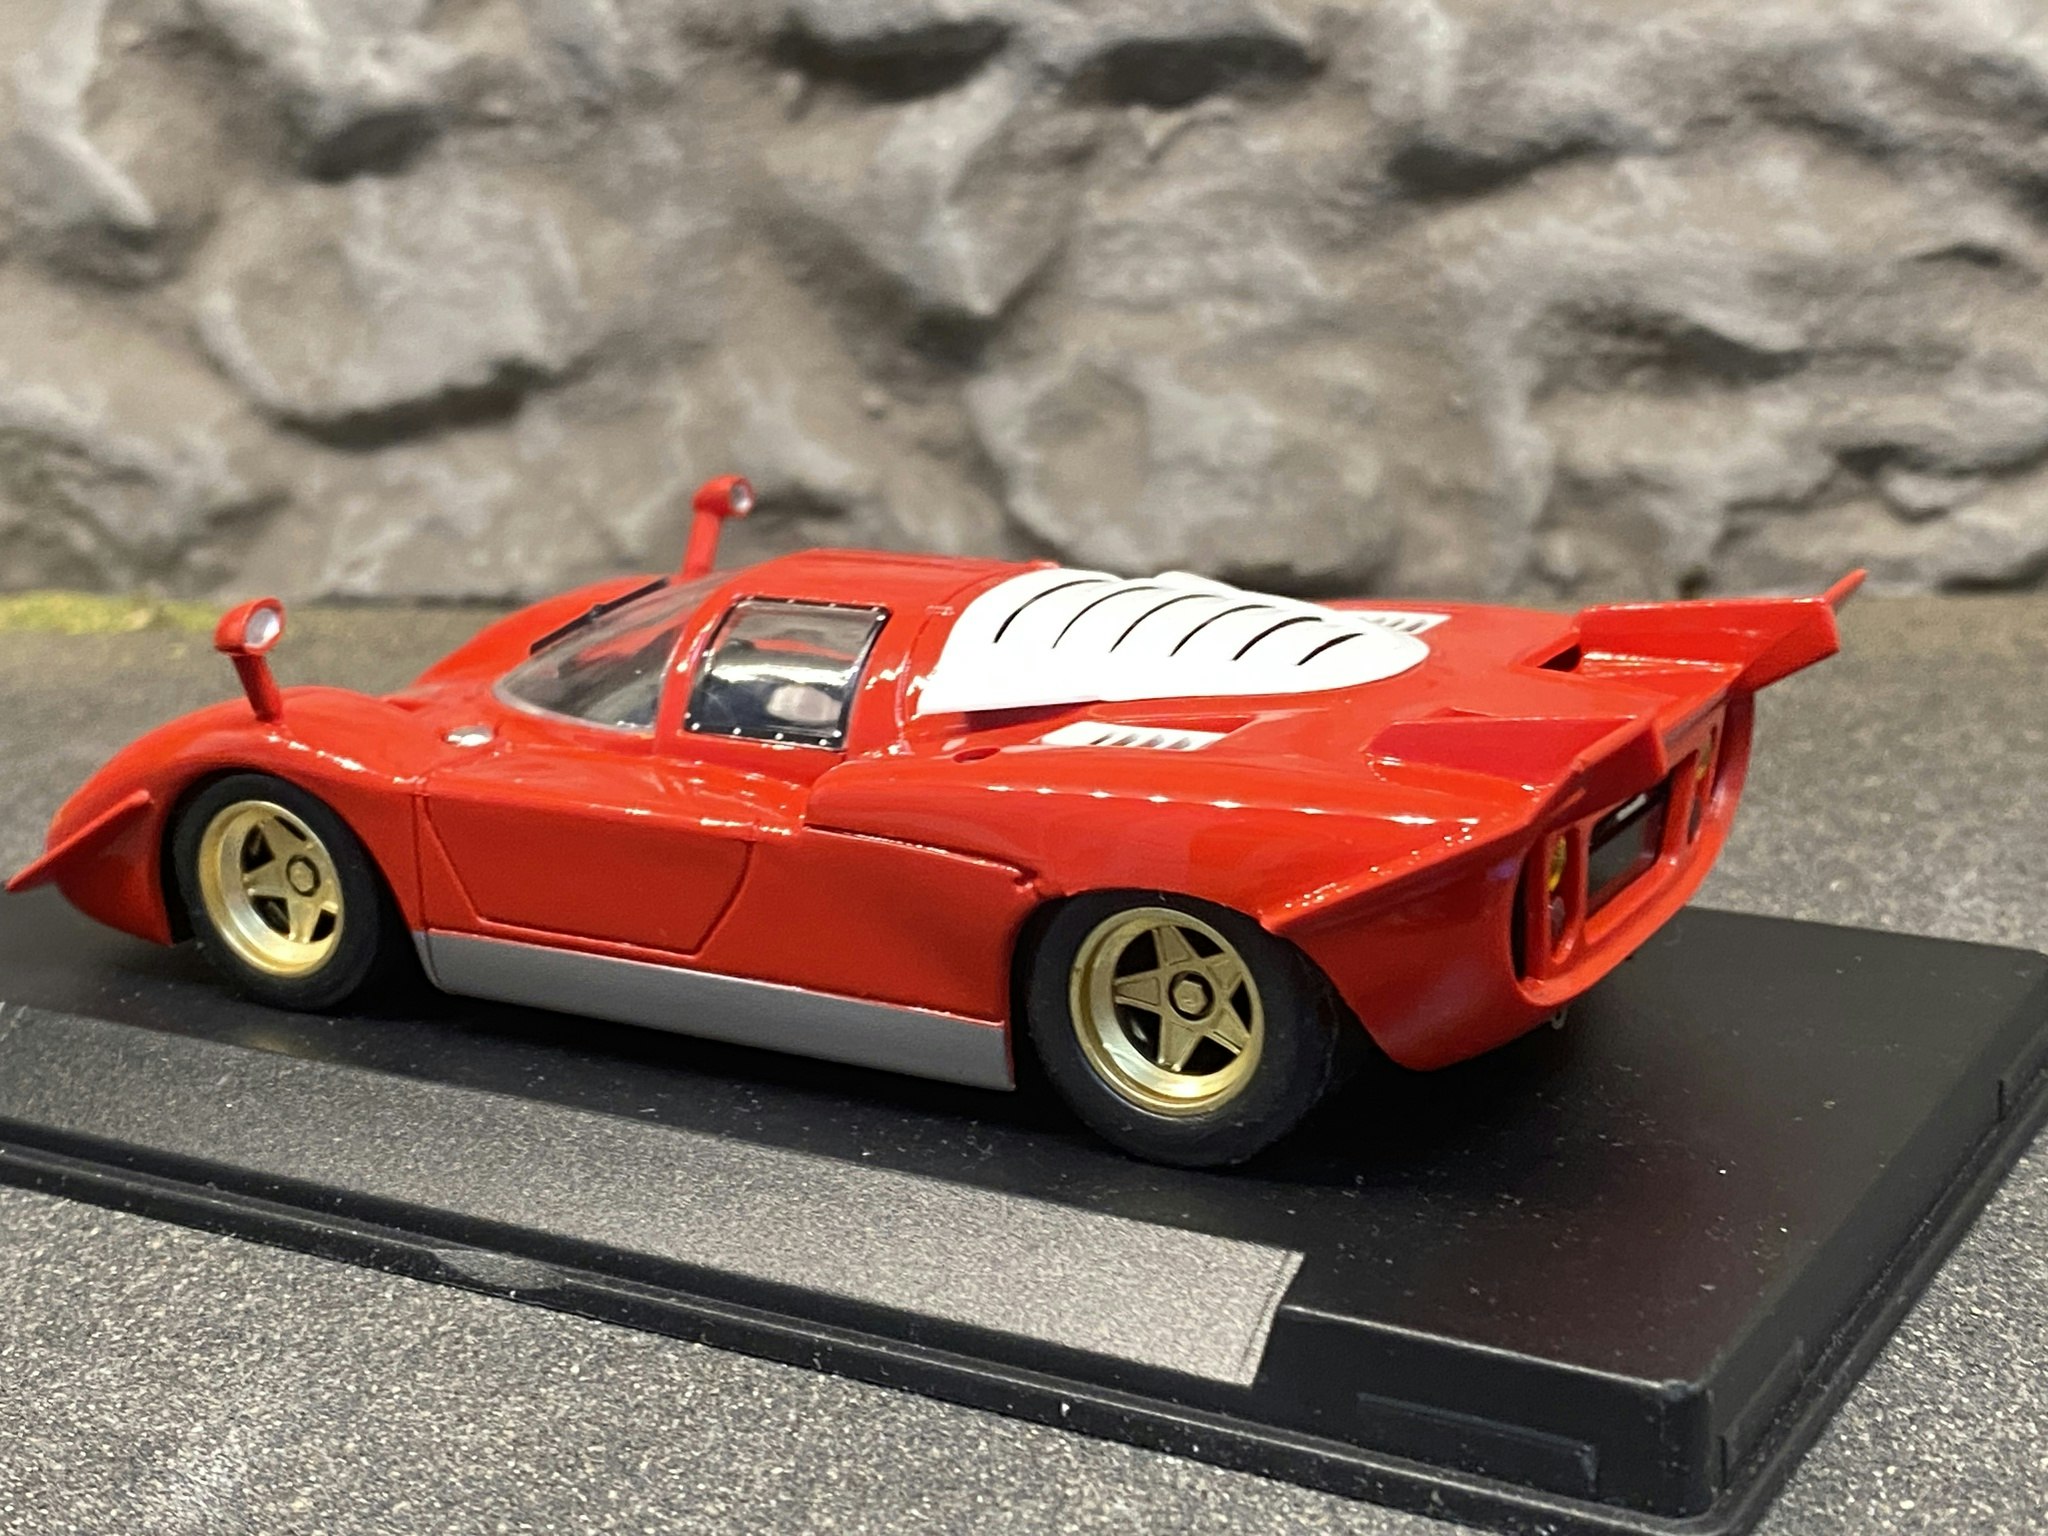 Scale 1/32 Analog FLY slotcar: Ferrari 512 S Berlinetta, without decals